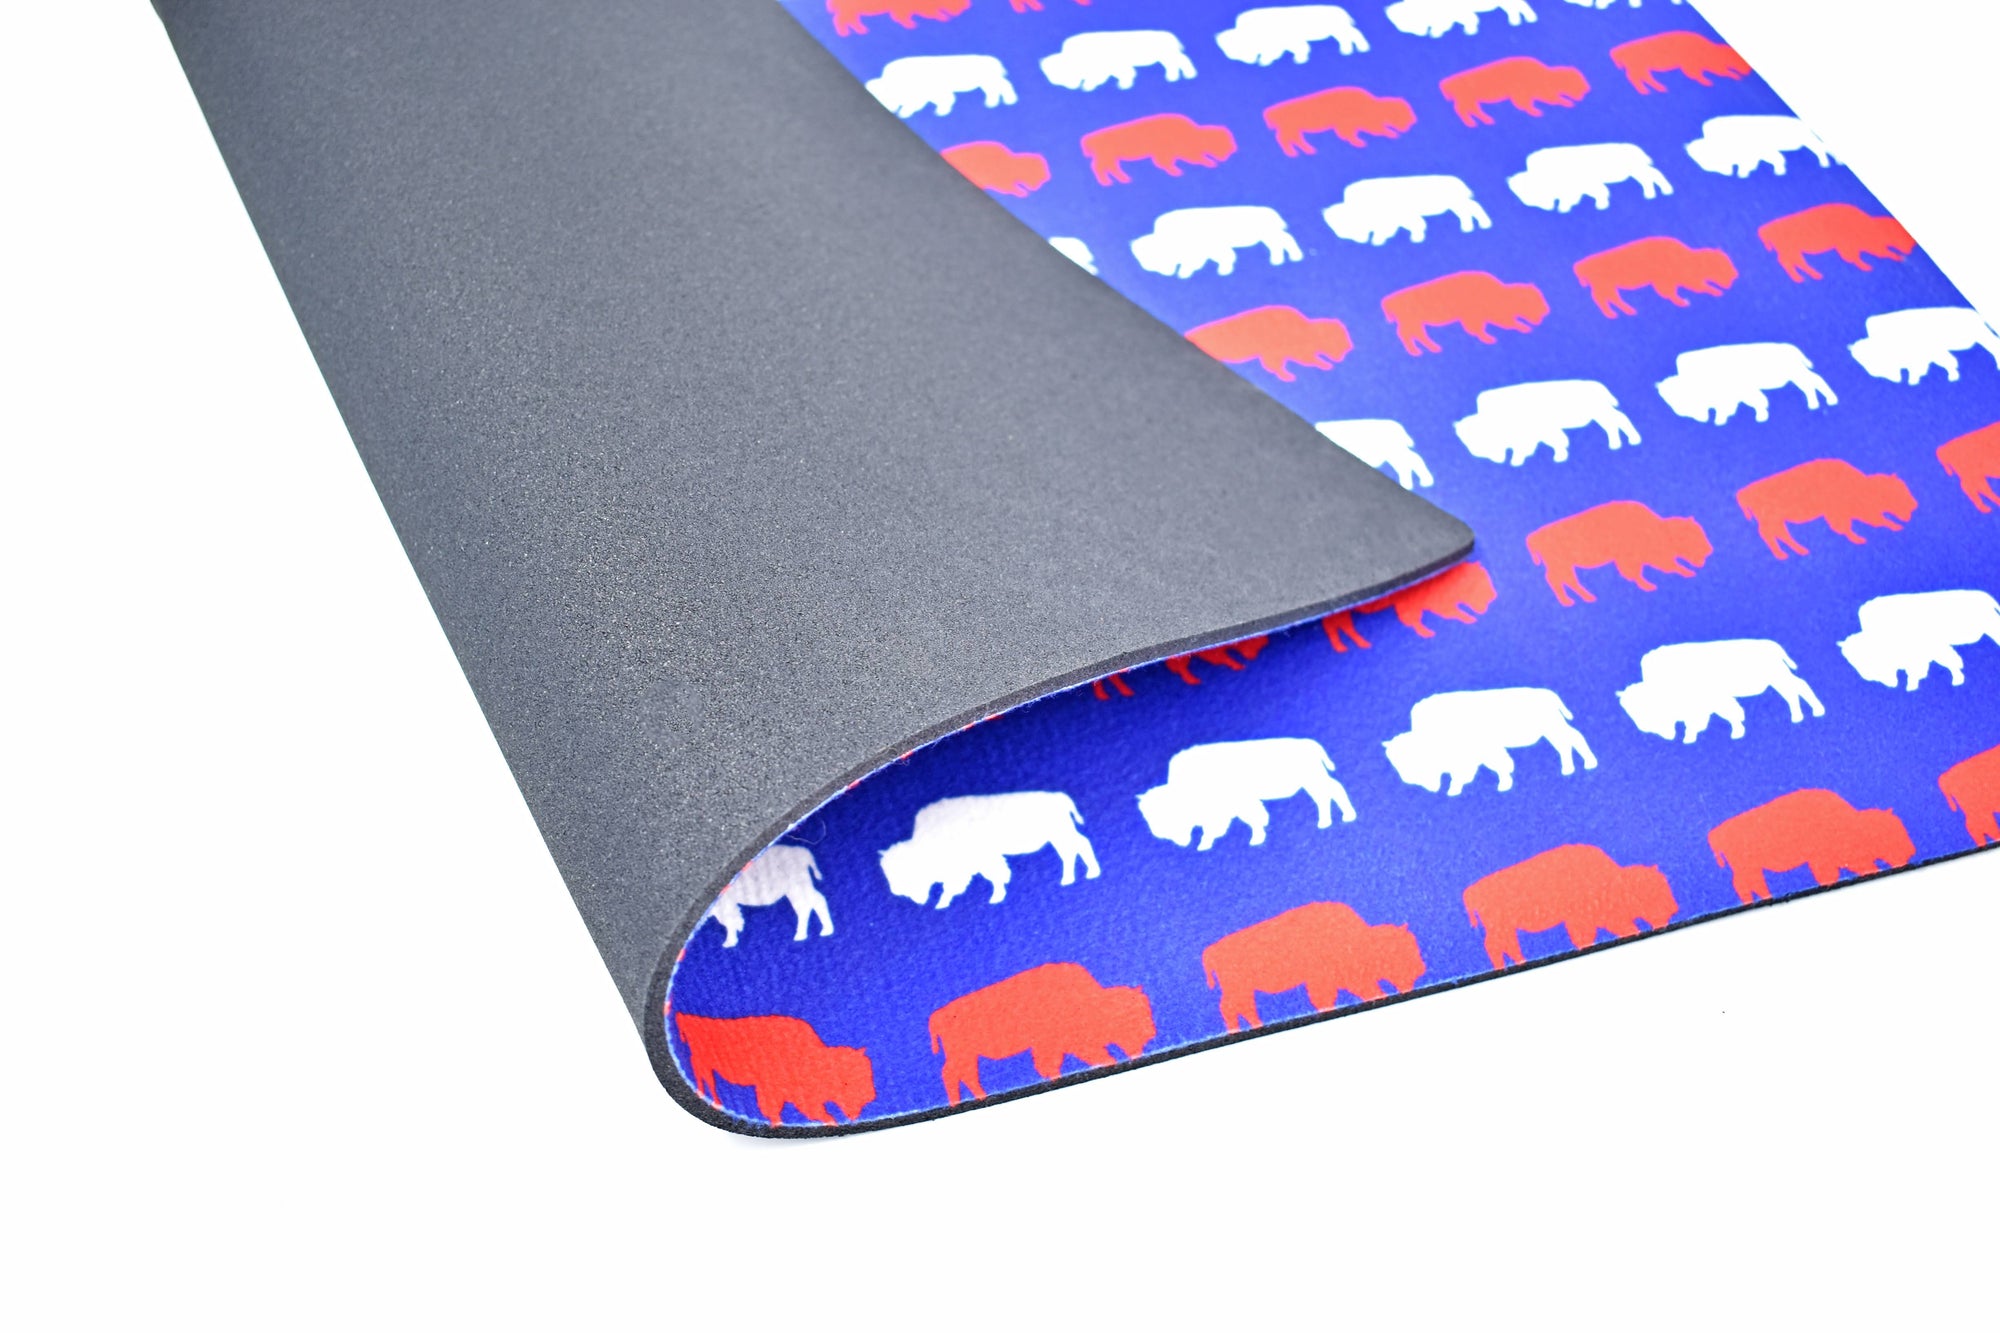 BFLO Red, White, And Blue Buffalo&#39;s Doormat